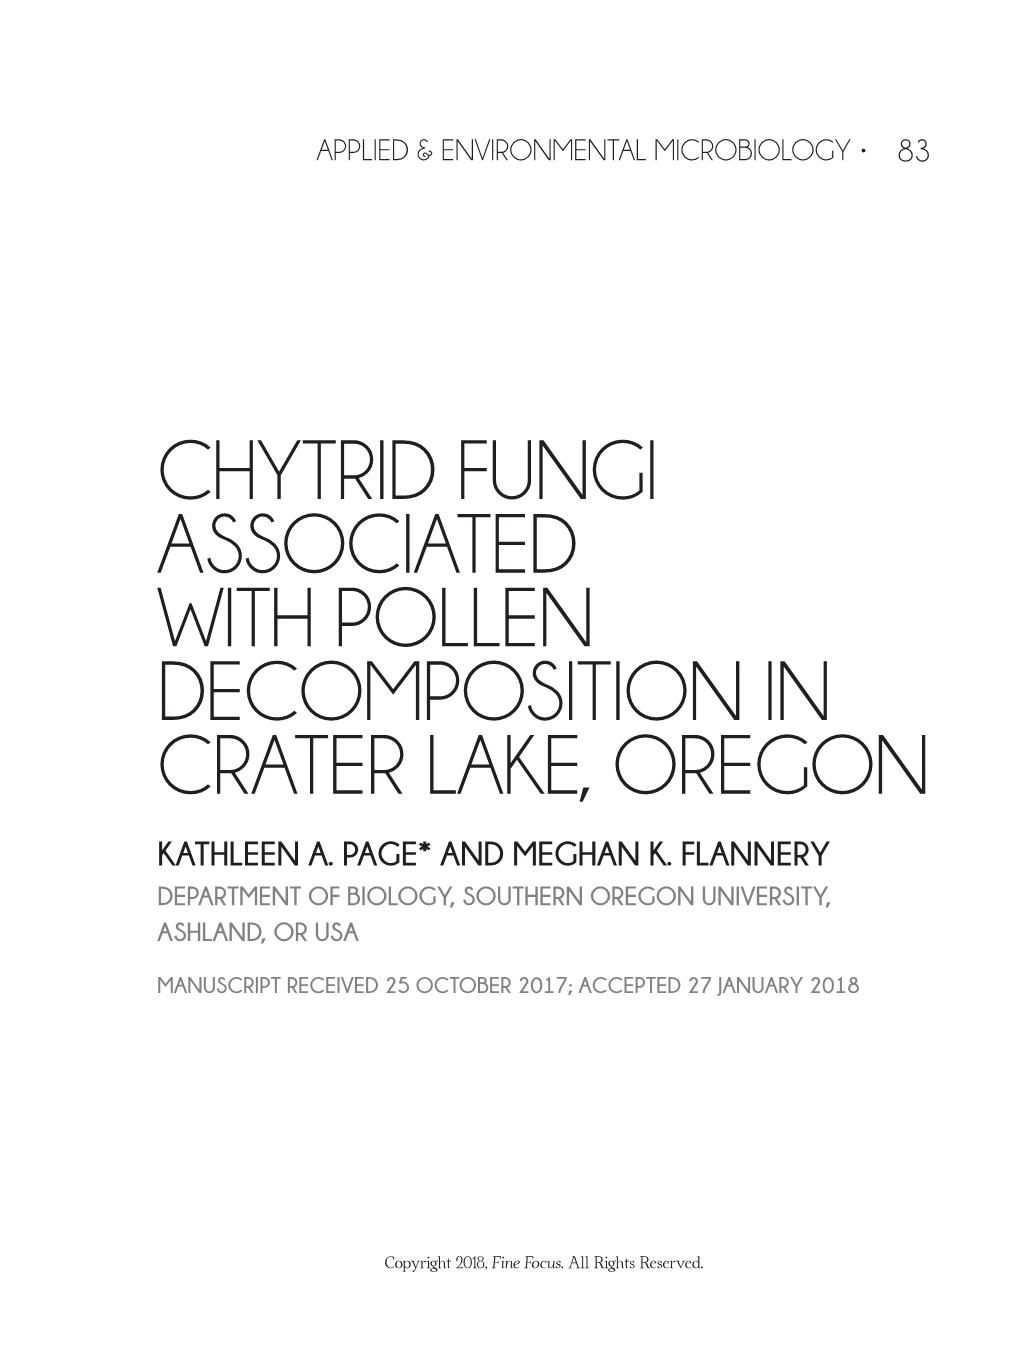 Chytrid Fungi Associated with Pollen Decomposition in Crater Lake, Oregon Kathleen A